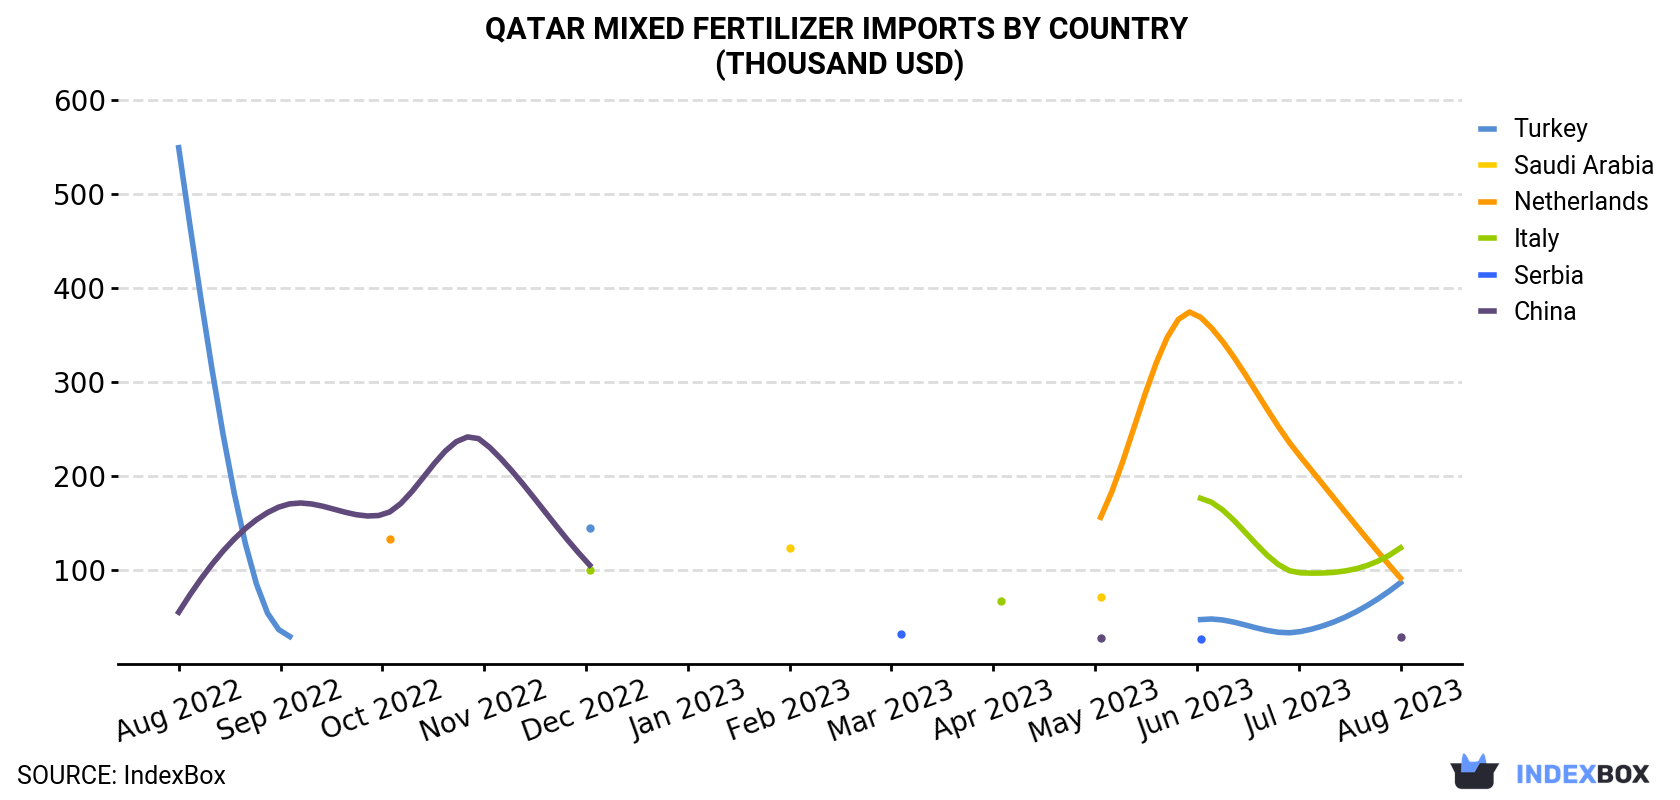 Qatar Mixed Fertilizer Imports By Country (Thousand USD)